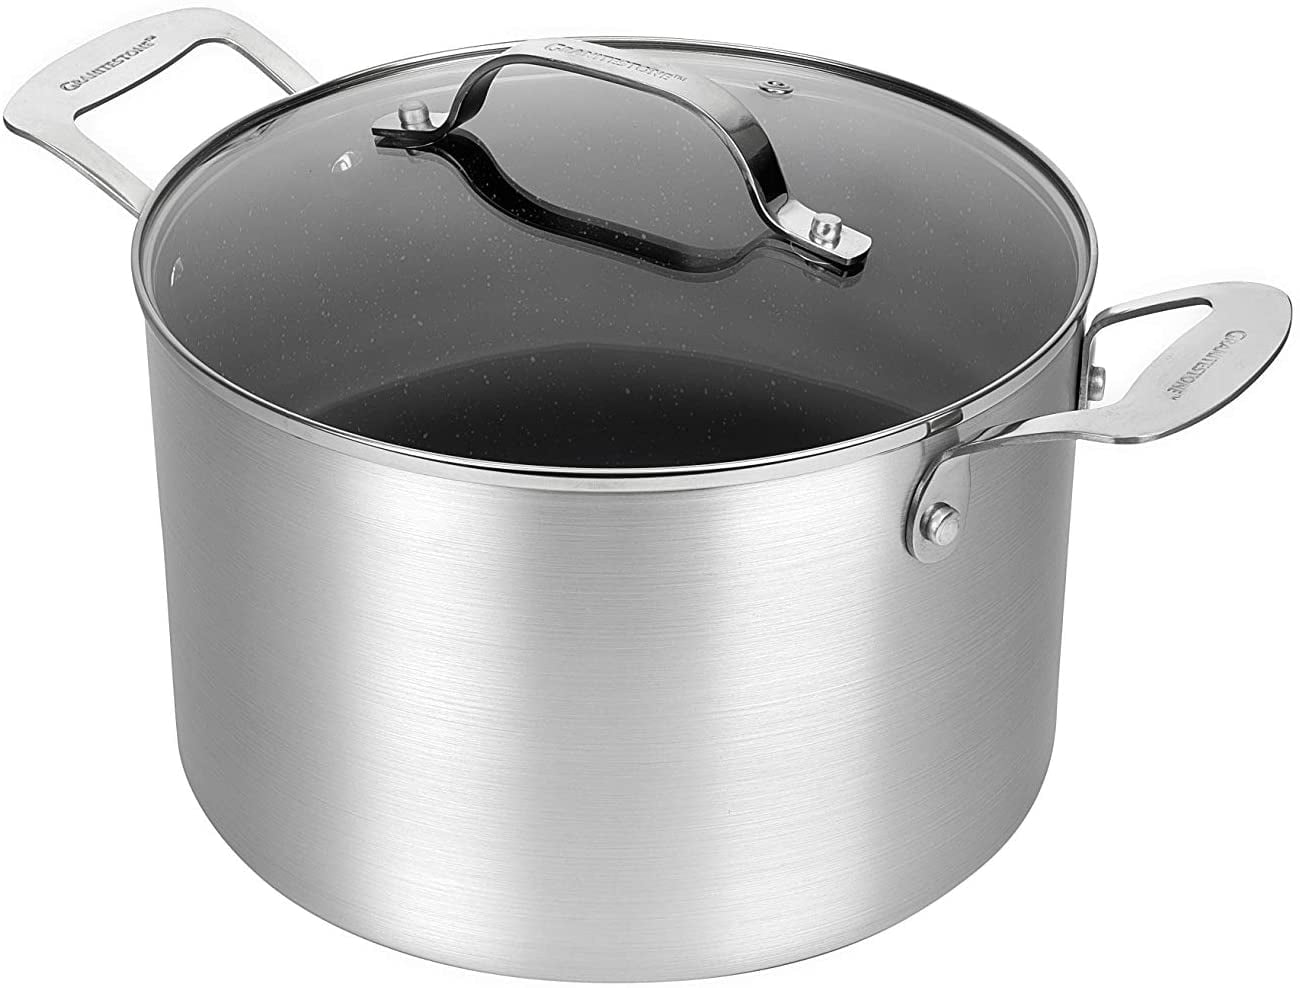 Millvado Granite 5 Qt Stockpot, Nonstick Soup Pot With Lid, Speckled Enamel  Ware Cookware, Large Stock Pot For Boiling and Cooking, Big Granite Cooking  Pot for Stovetop, Campfire, Outdoor Stove 